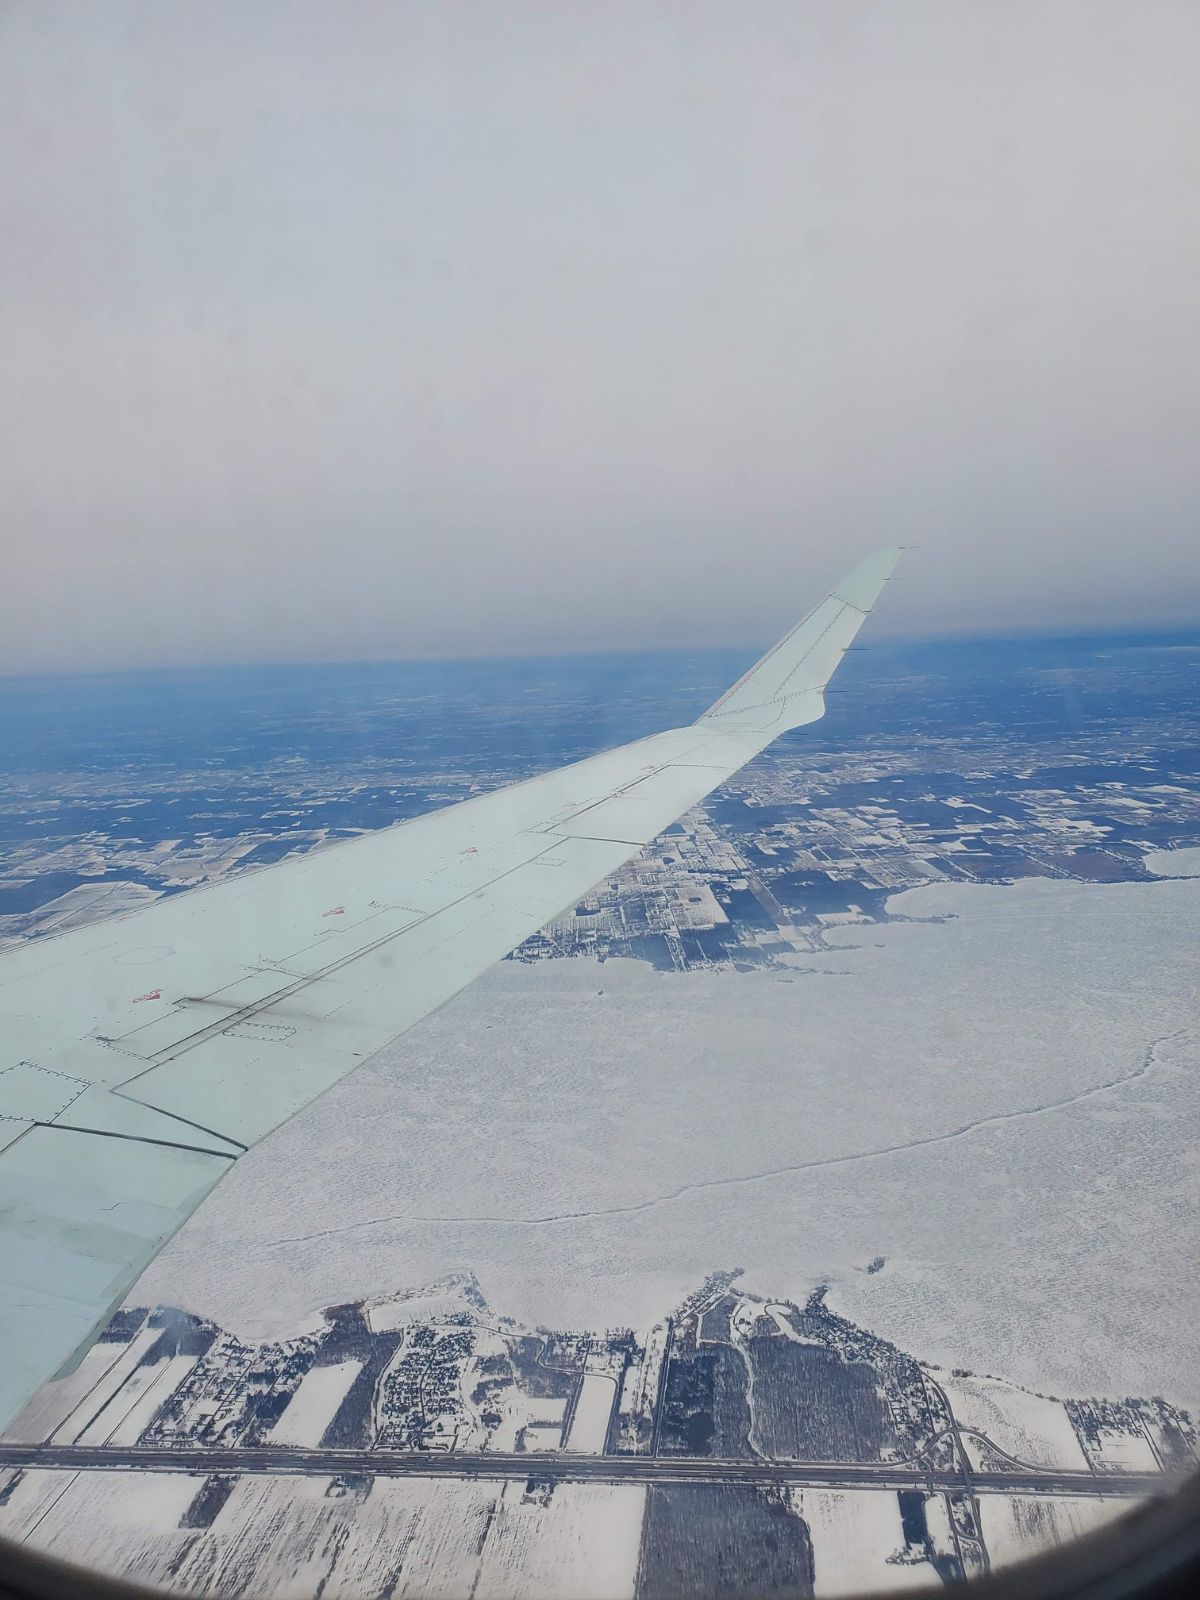 The view from a plane window. A snowy landscape below and the plane wing.